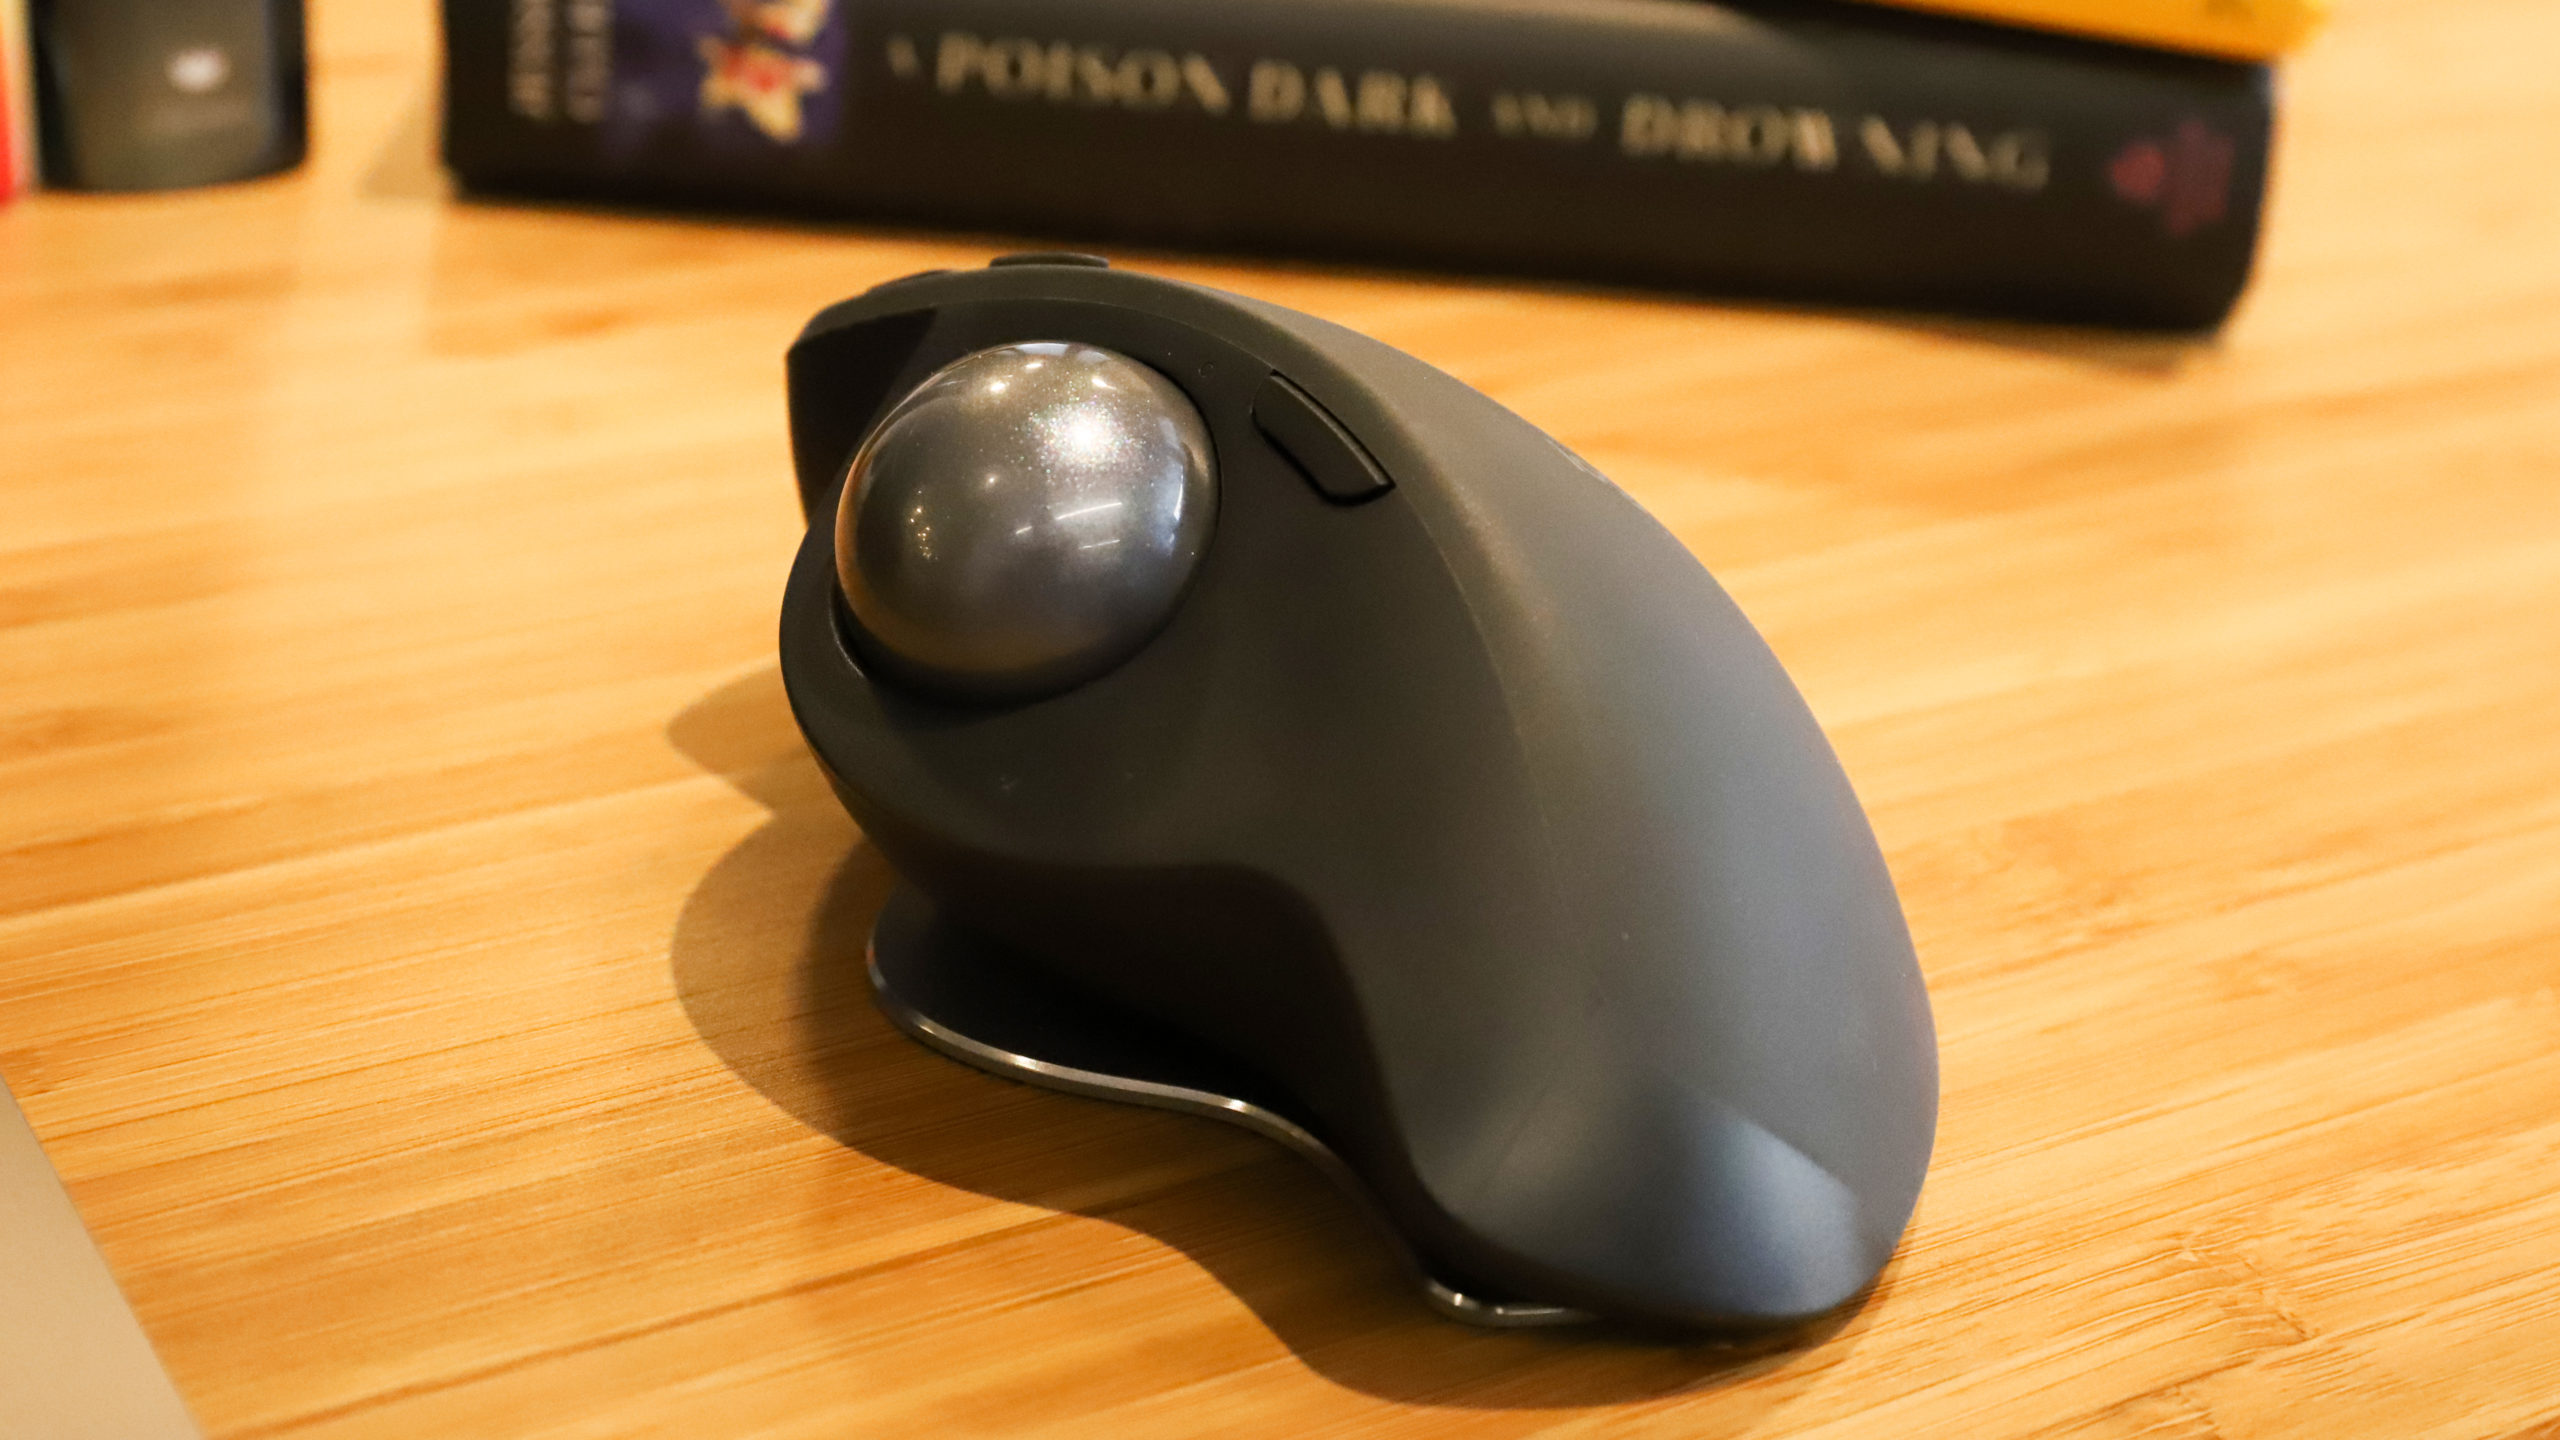 Why The Hell Would Anyone Use A Trackball Mouse?